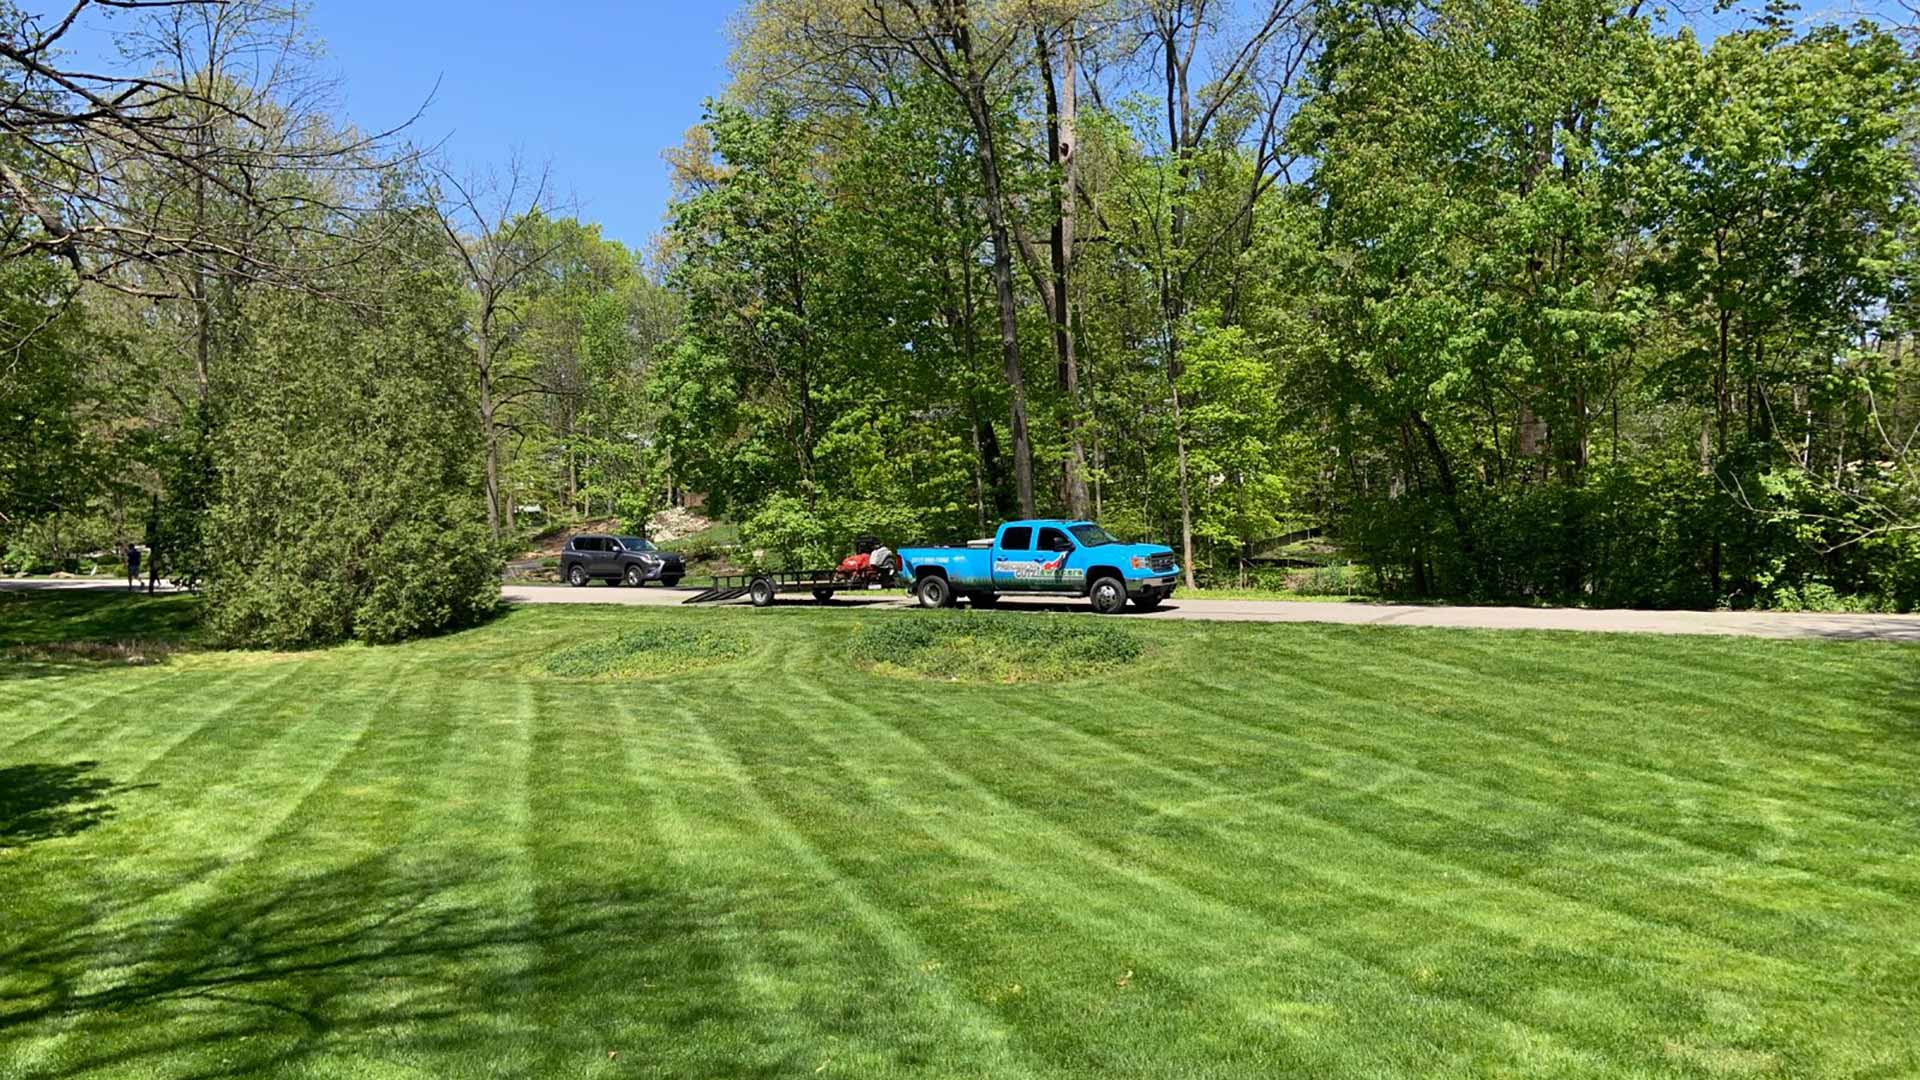 Beautiful, green home lawn with mowing lines near Whitestown, IN.